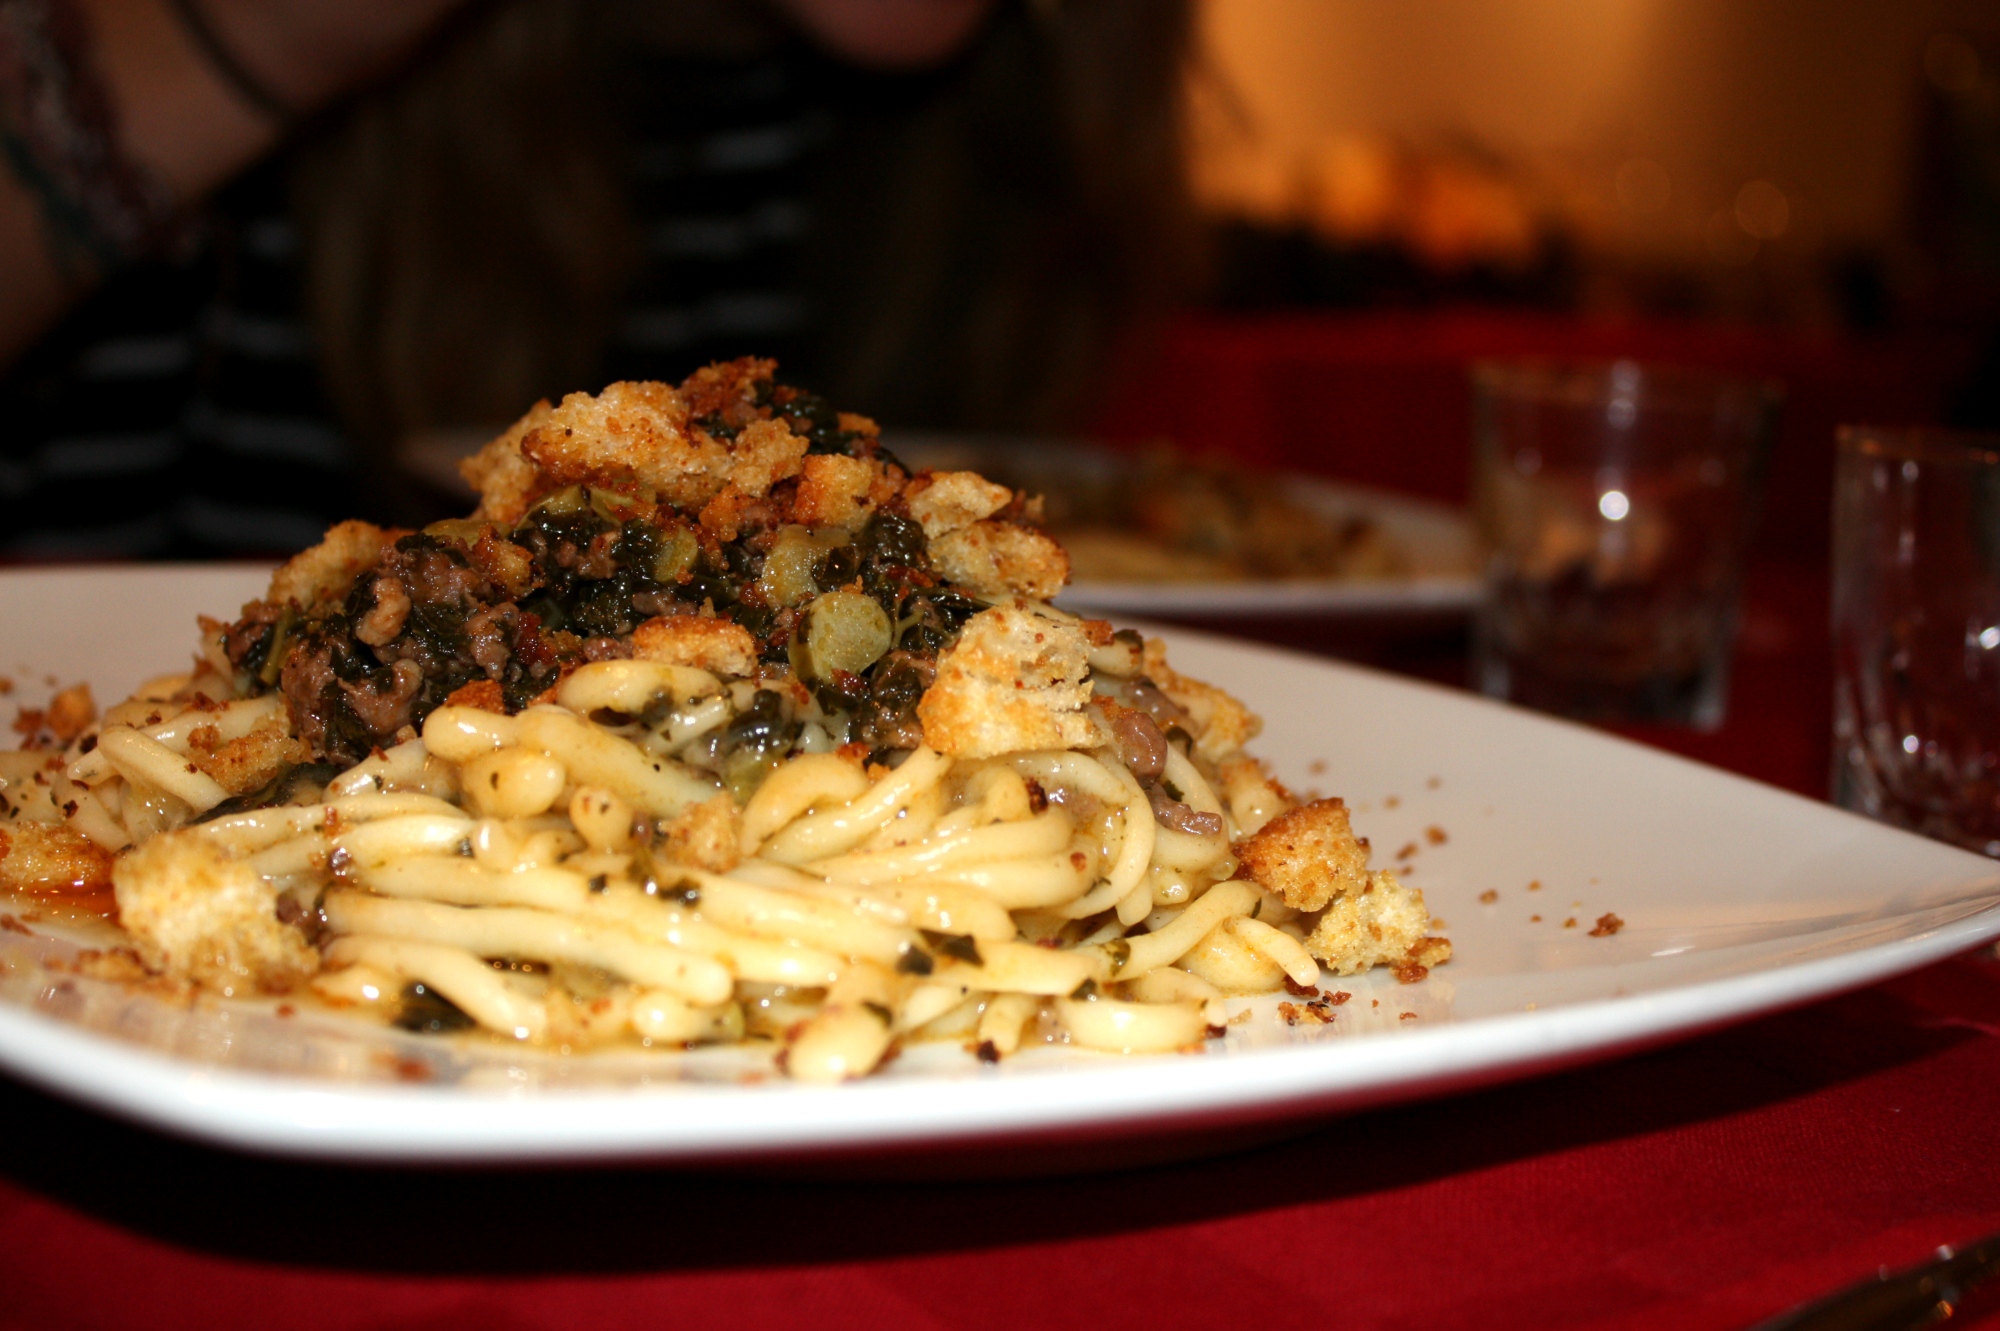 A plate of Tuscan pici typical of the Val d'Orcia